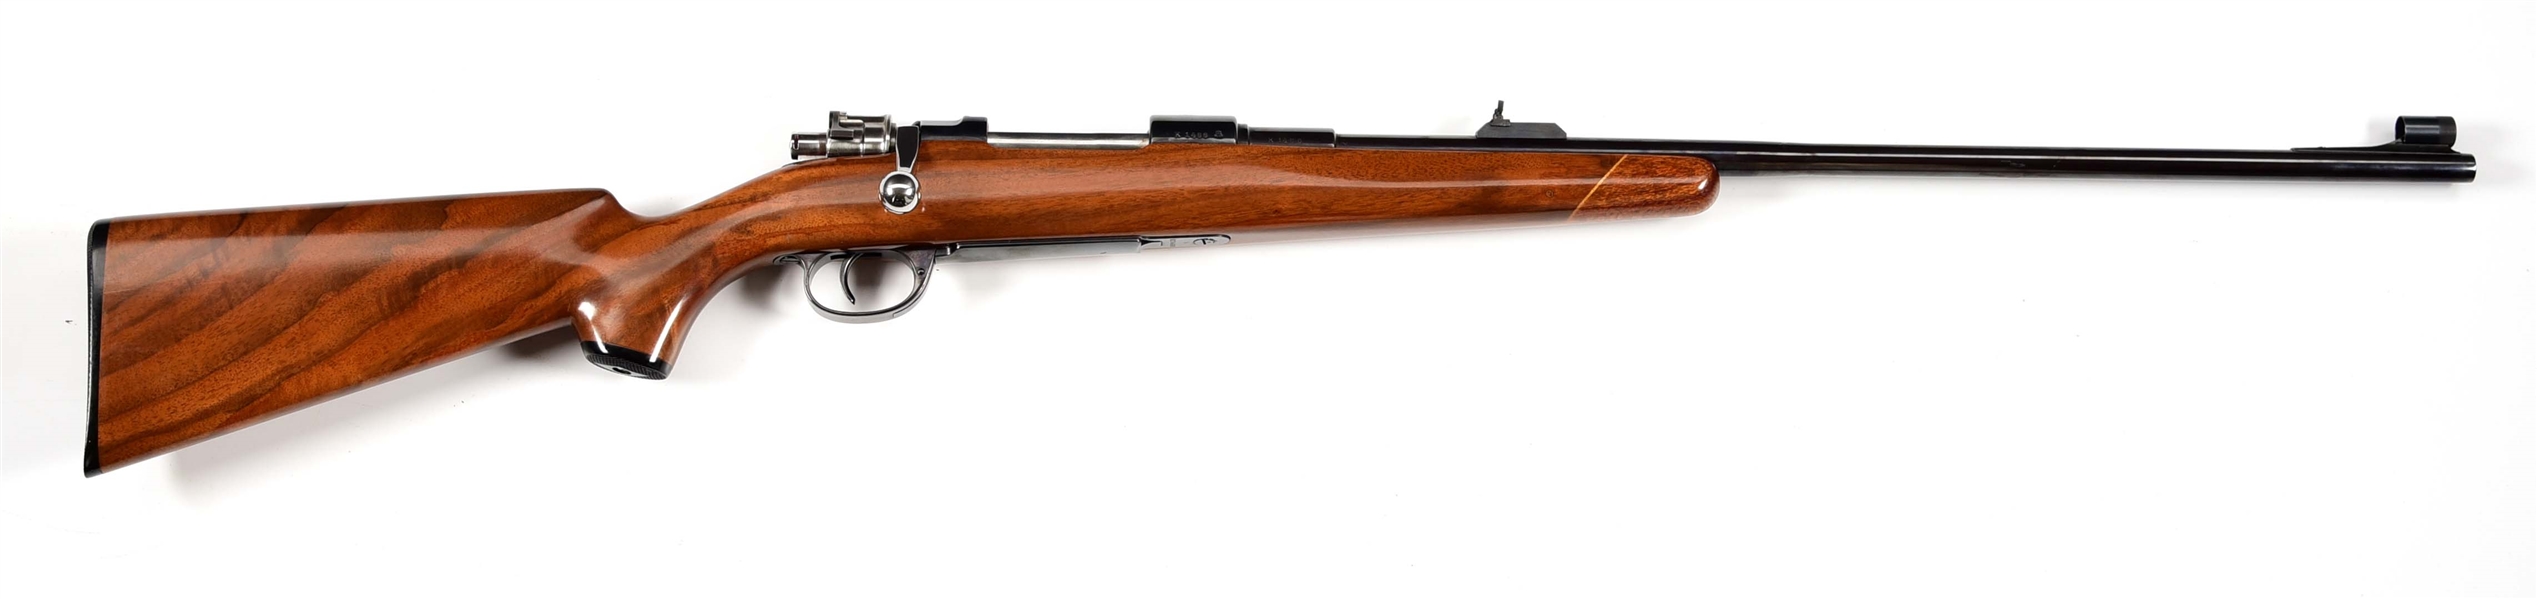 (C) QUALITY SPORTERIZED ARGENTINEAN 1909 MAUSER BOLT ACTION RIFLE.